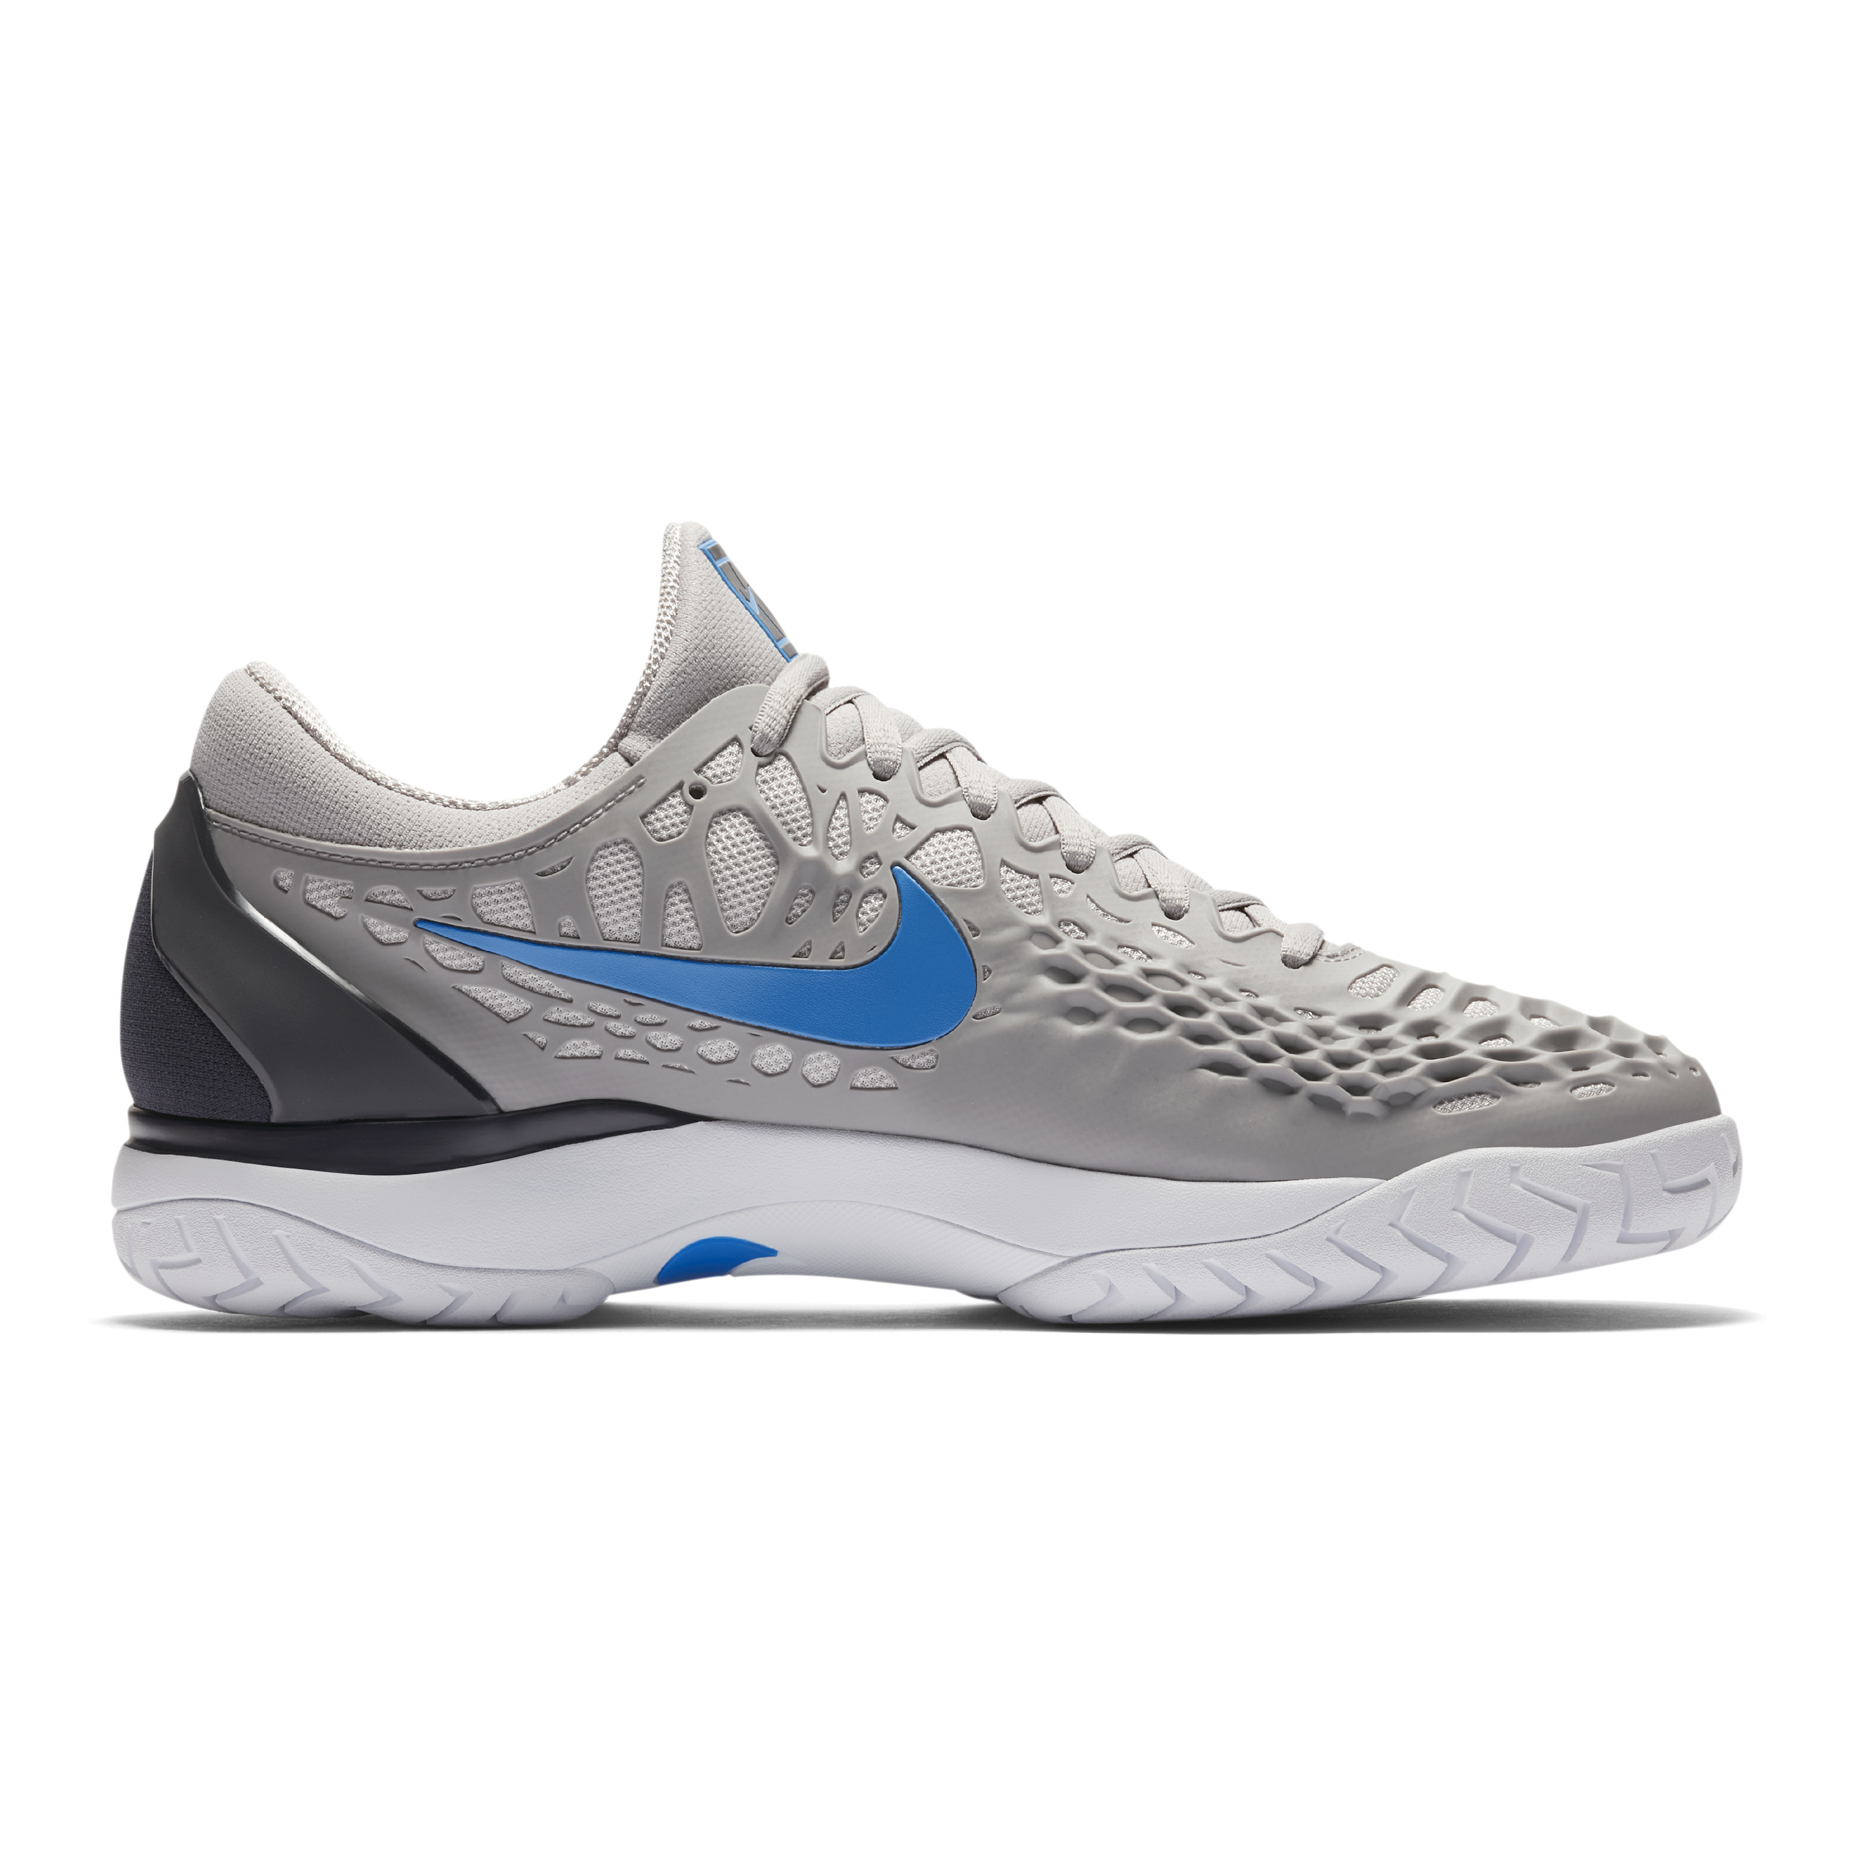 nike air zoom cage 3 mens tennis shoes